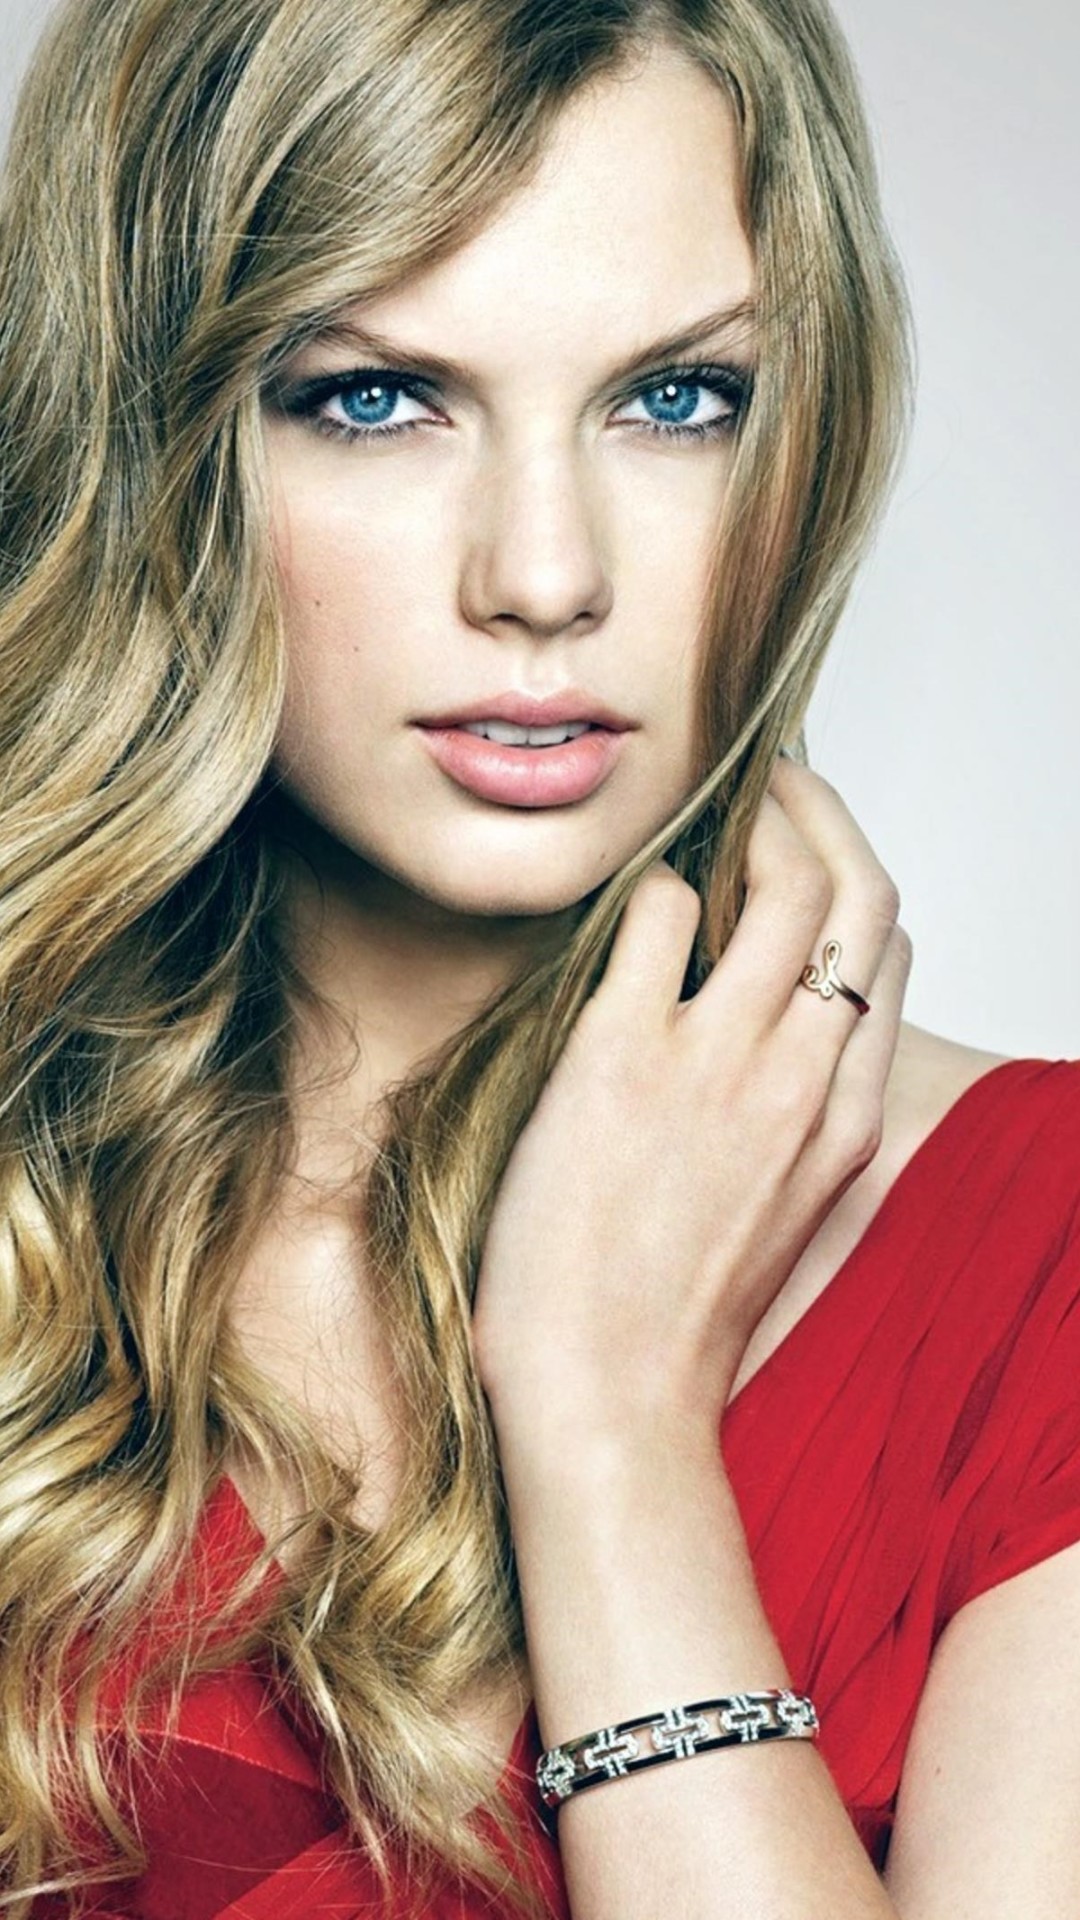 taylor swift iphone wallpaper,hair,face,eyebrow,blond,hairstyle